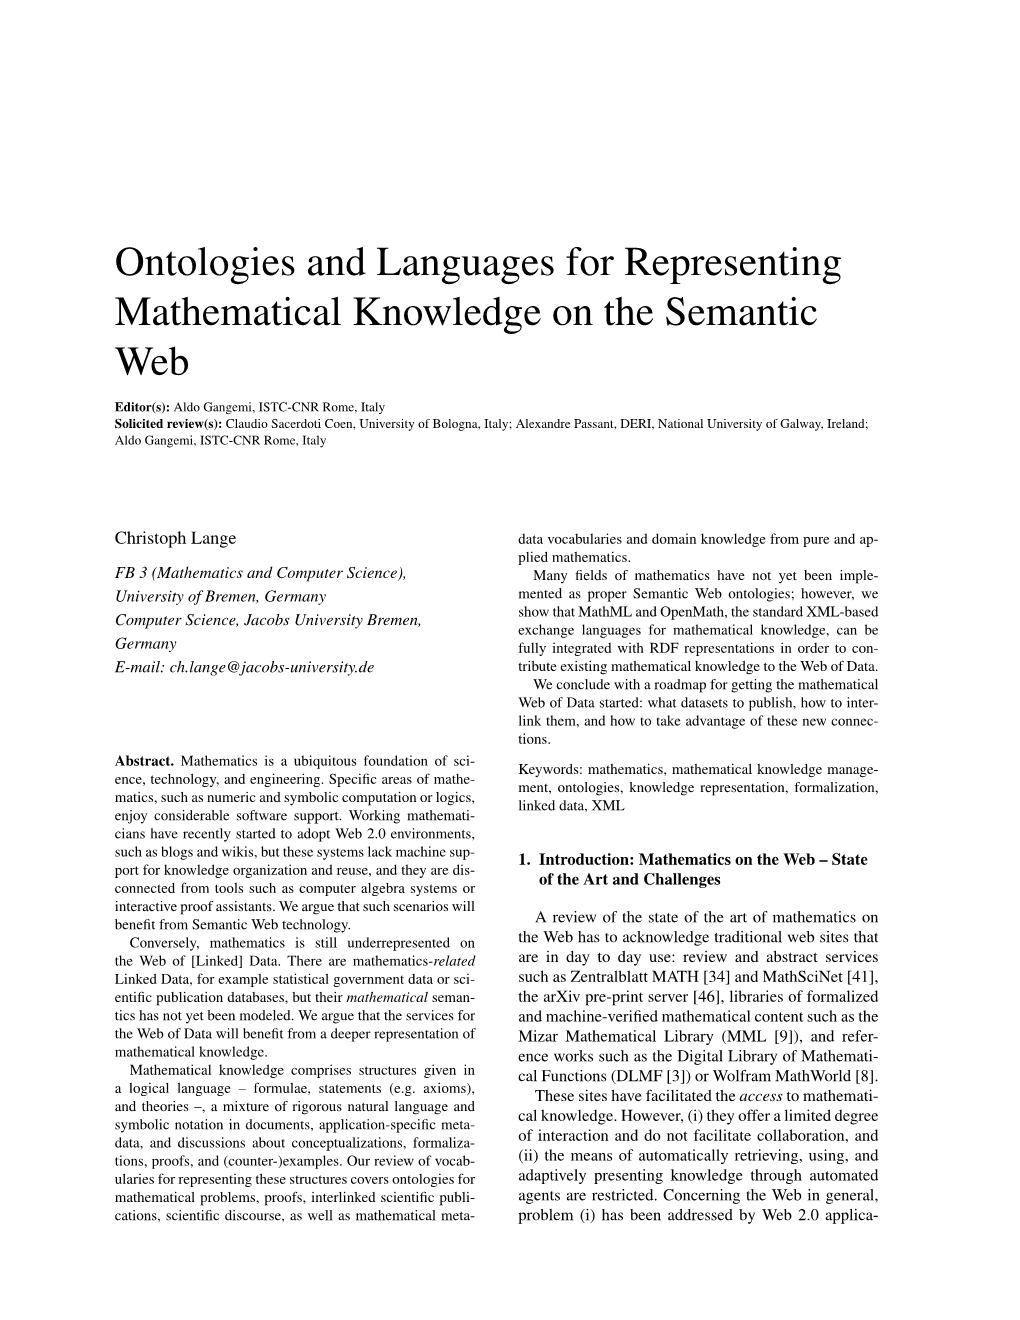 Ontologies and Languages for Representing Mathematical Knowledge on the Semantic Web